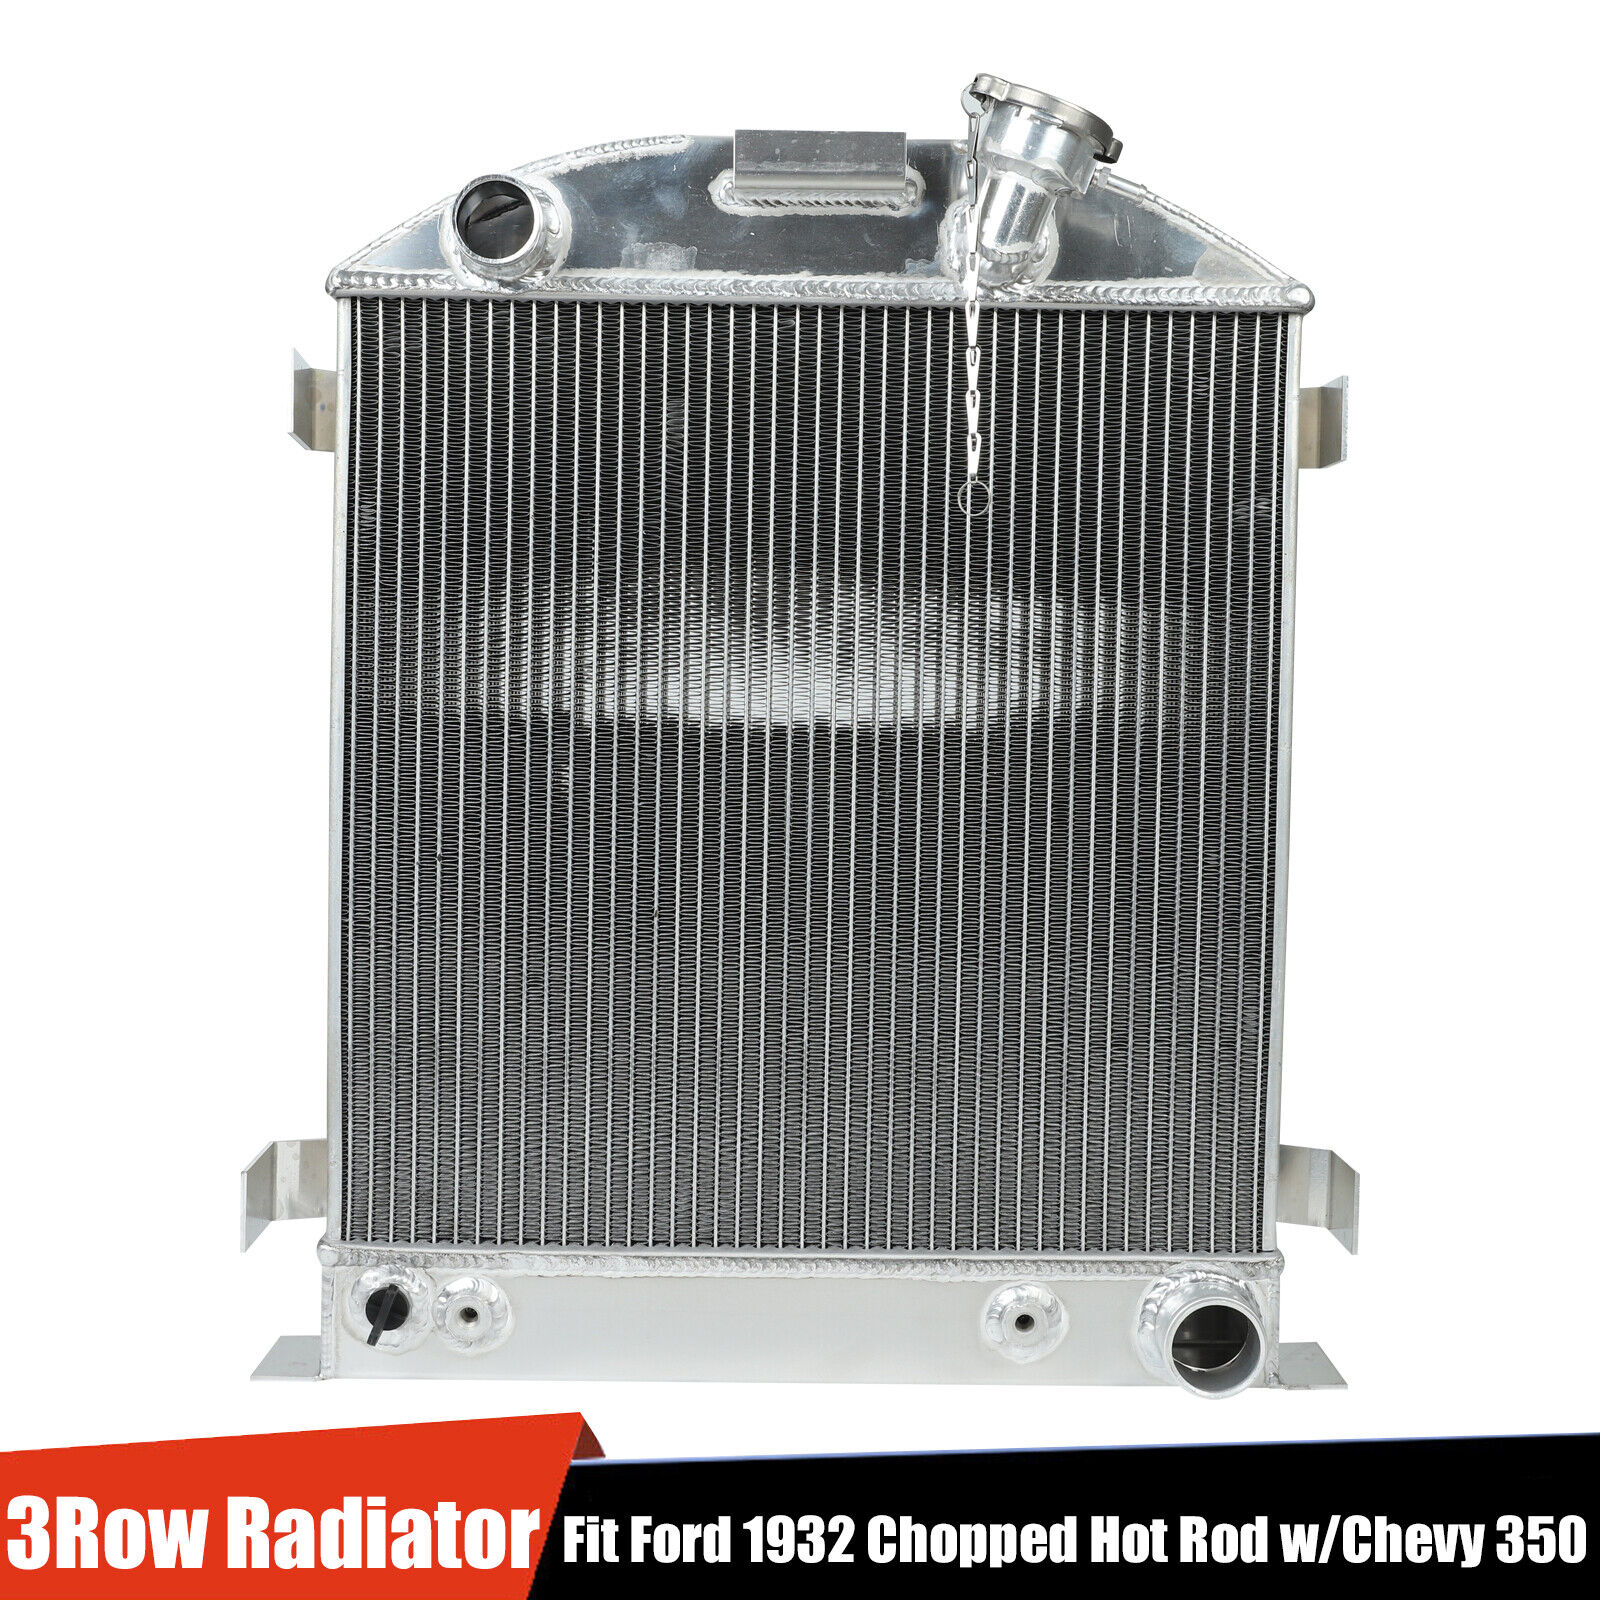 62mm 3 Row Aluminum Radiator For Ford 1932 Chopped Hot Rod w/Chevy 350 V8 Engine